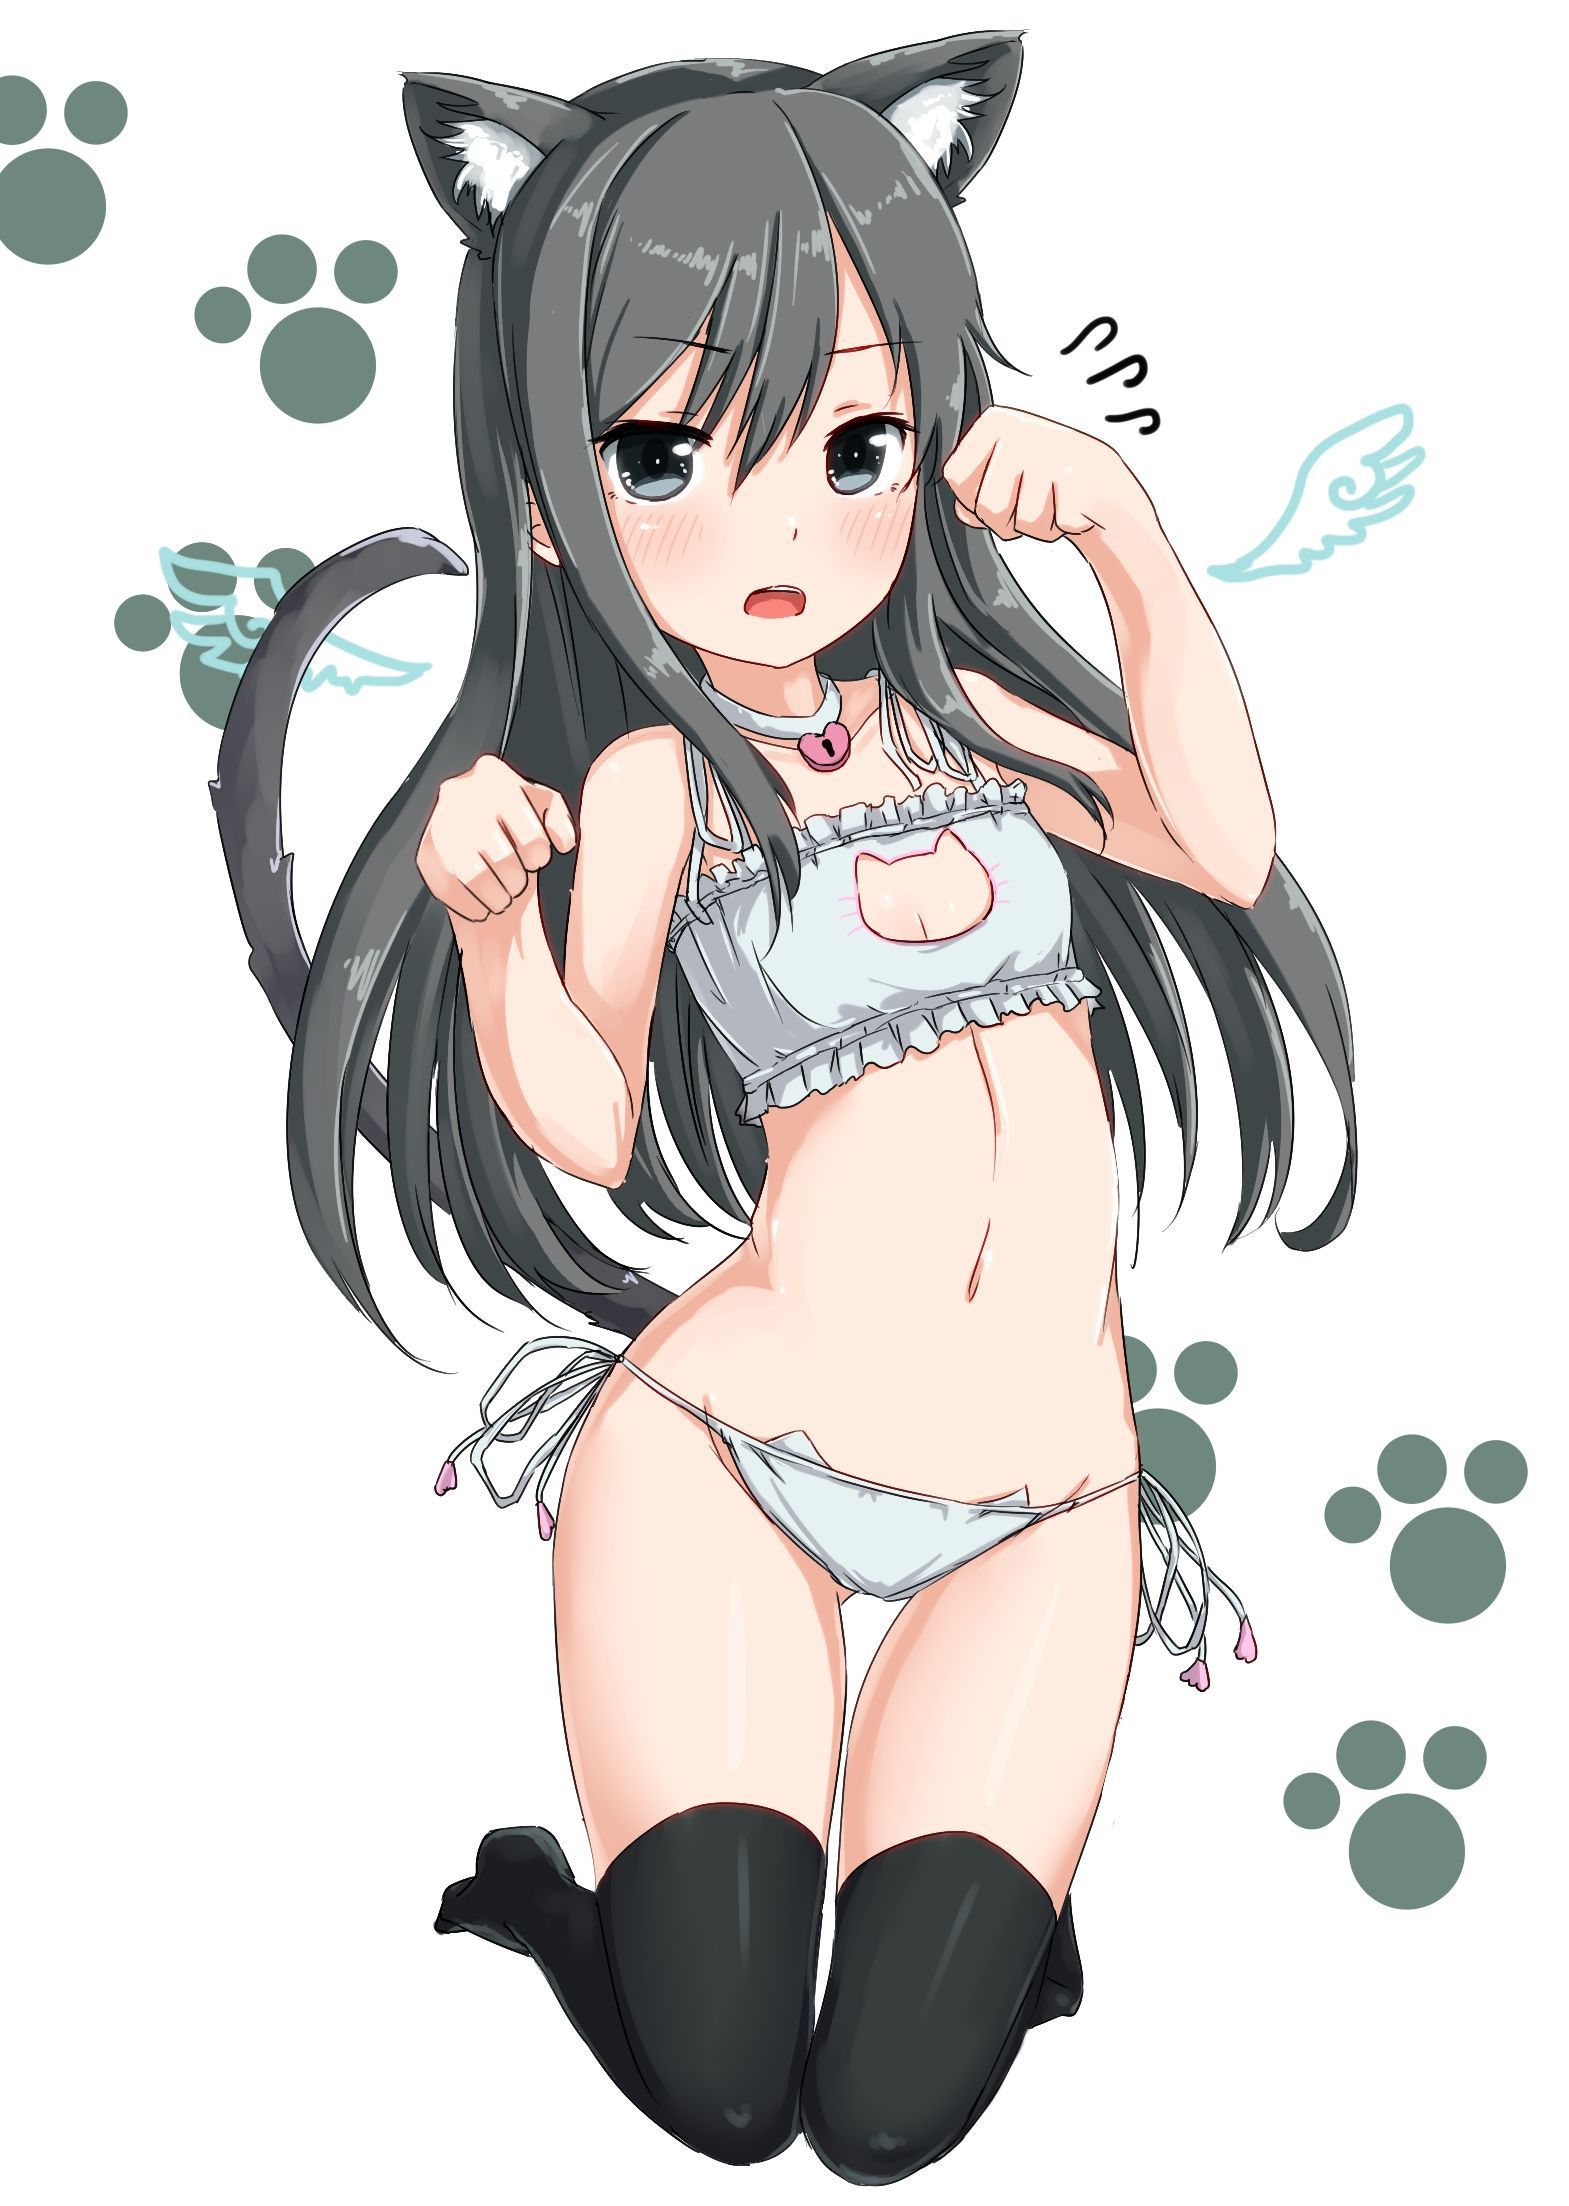 [Secondary, ZIP] pretty serious ship it together images of asashio 100 49